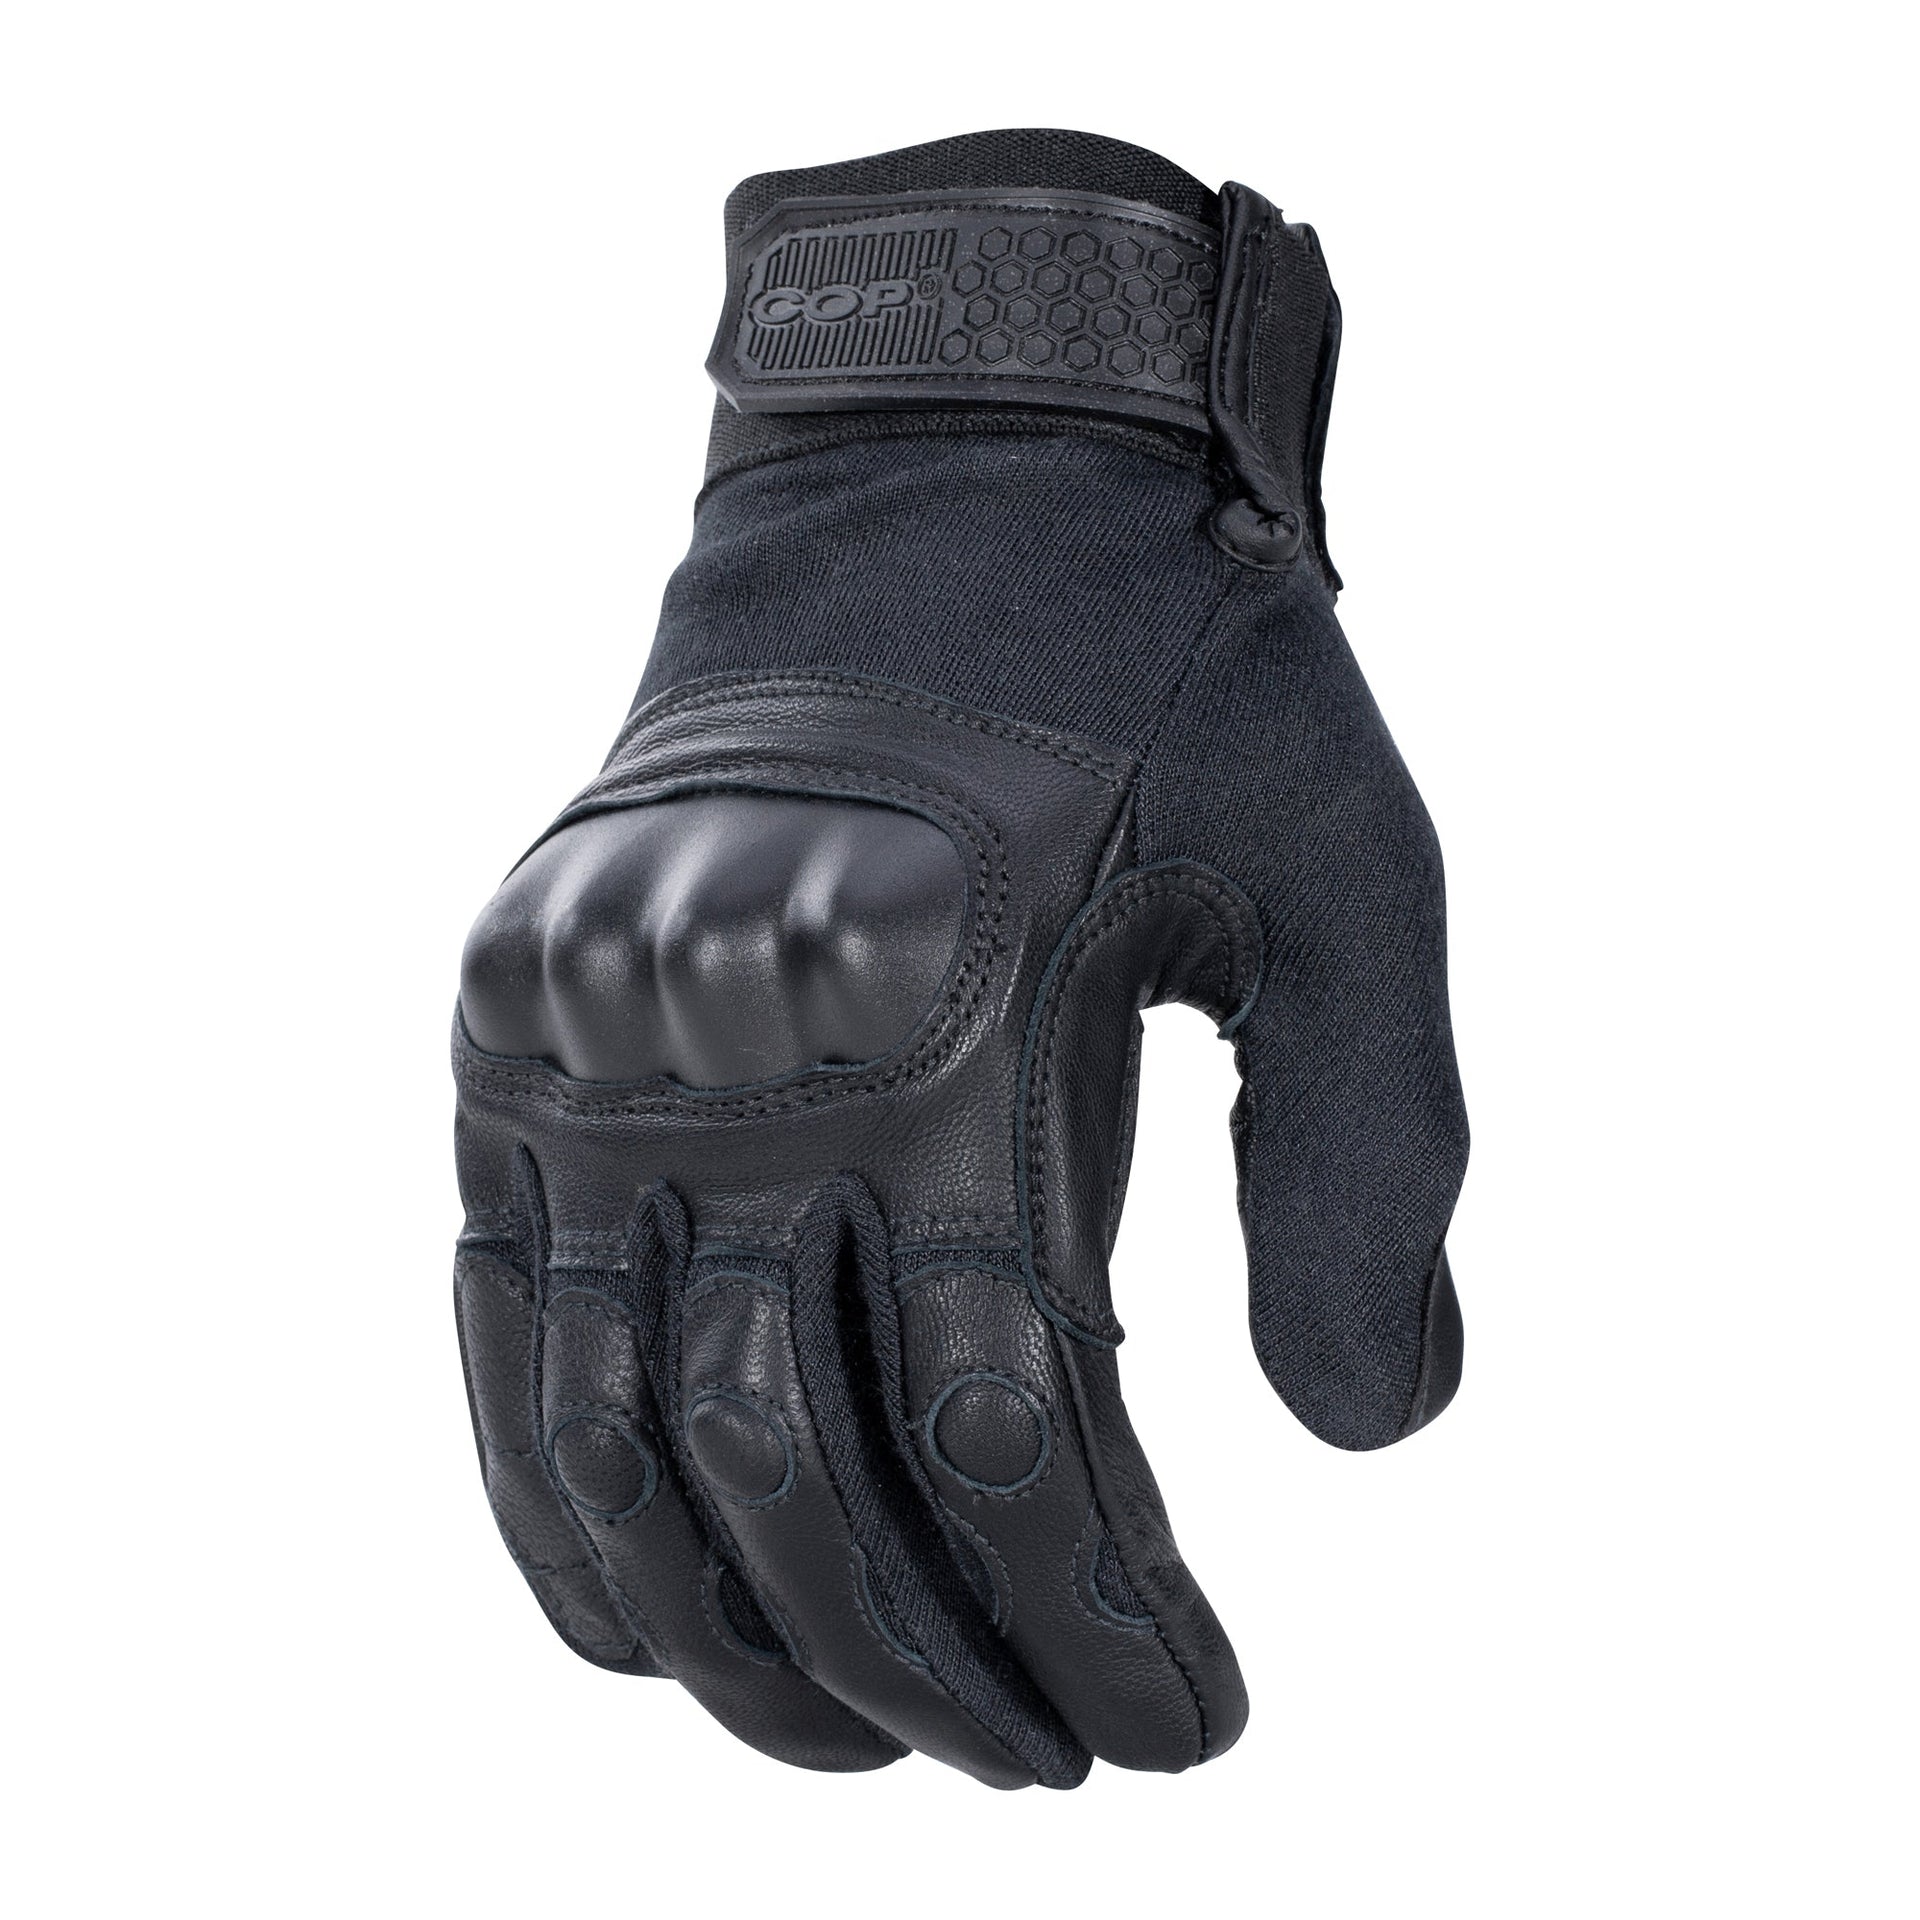 Cop Deployment and Access Glove FG10TS